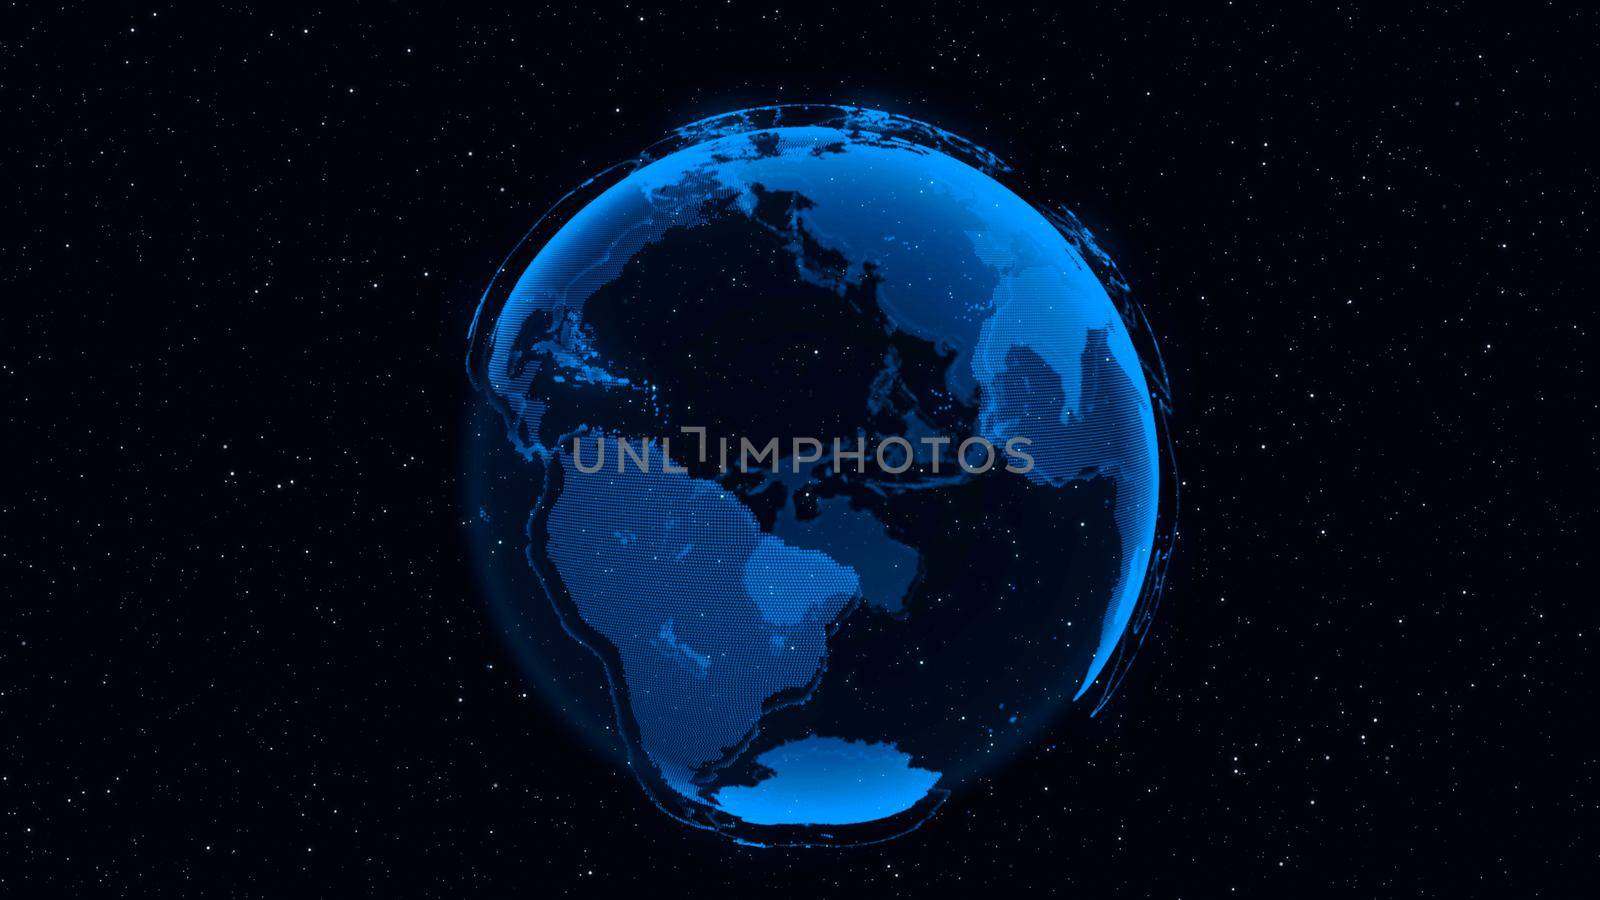 3D Digital Earth shows concept of global network connection of international people in global business rotating in stars and space background. Modern information technology and globalization concept.